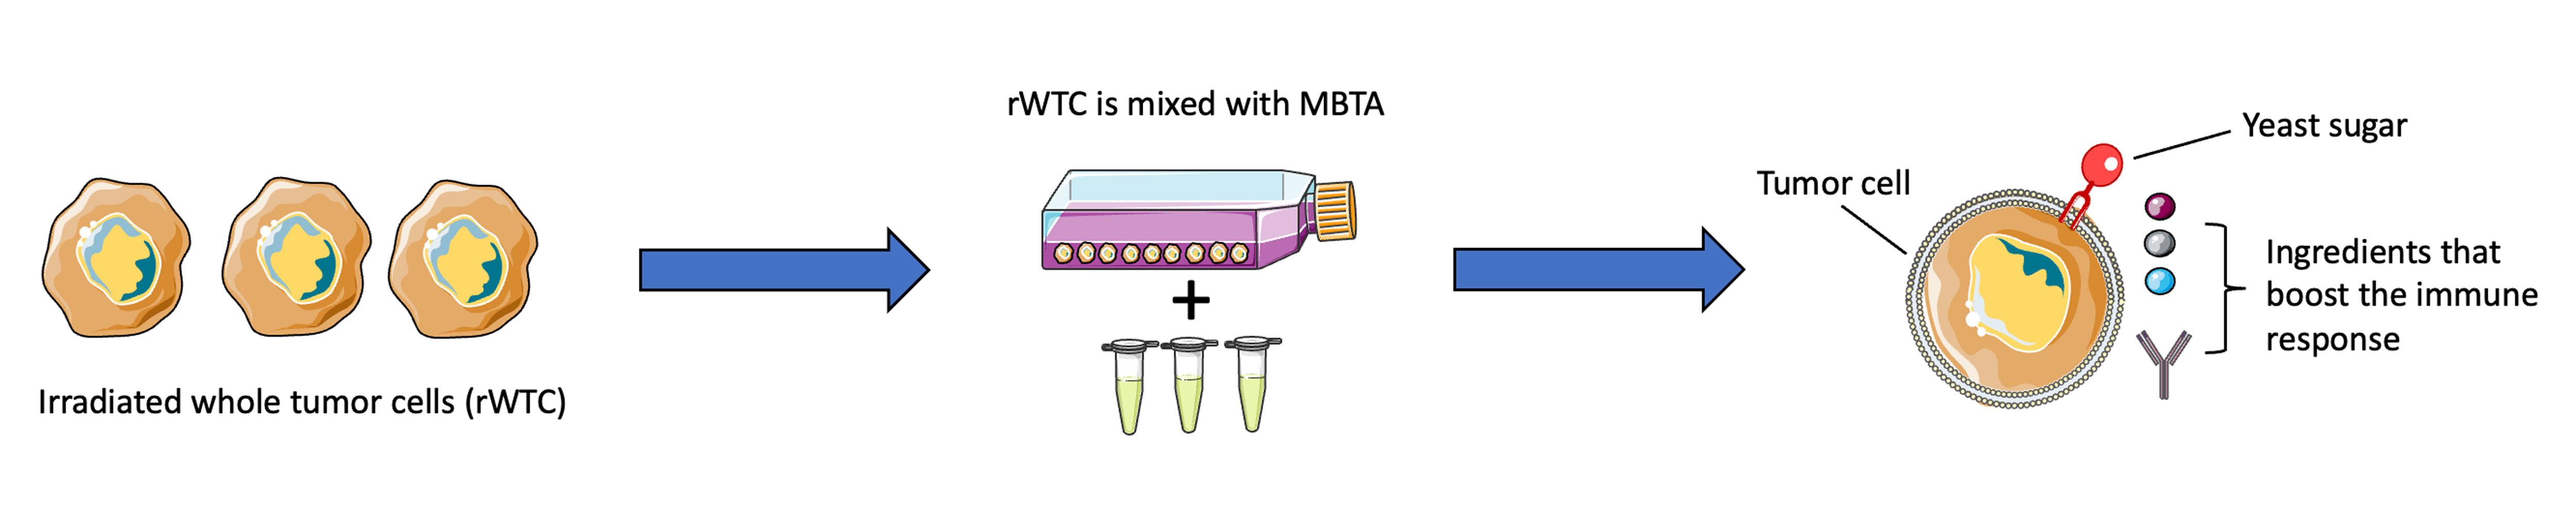 Illustration showing that irradiated whole tumor cells (rWTC) are mixed with MBTA to make the vaccine.